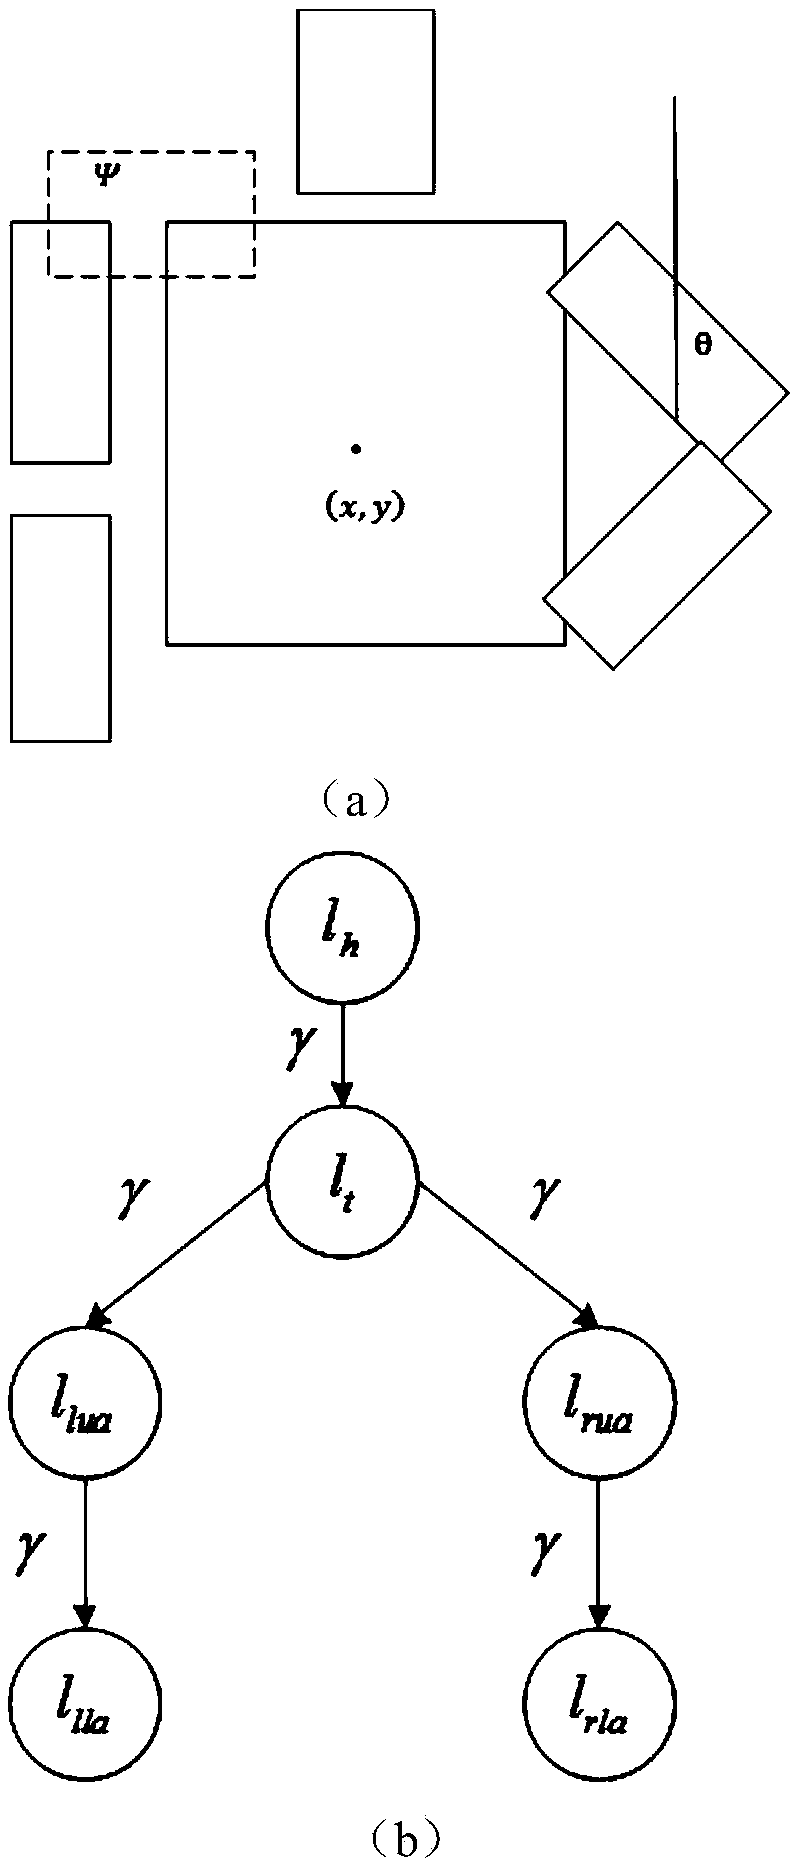 A Human Action Classification Method Based on Pose Recognition